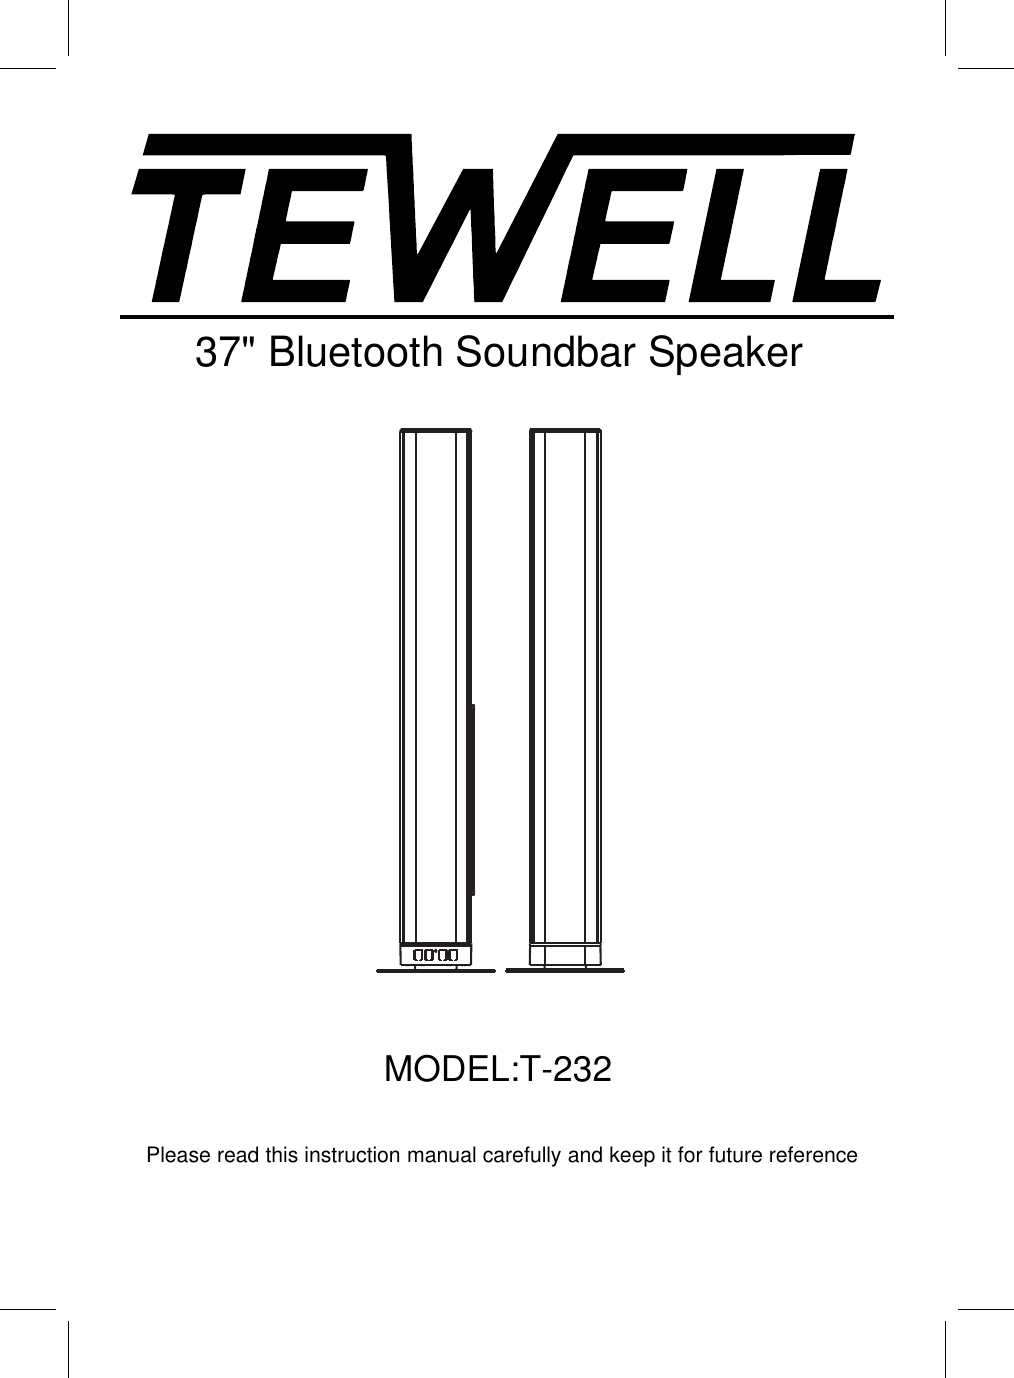 Please read this instruction manual carefully and keep it for future referenceMODEL:T-23237&quot; Bluetooth Soundbar Speaker